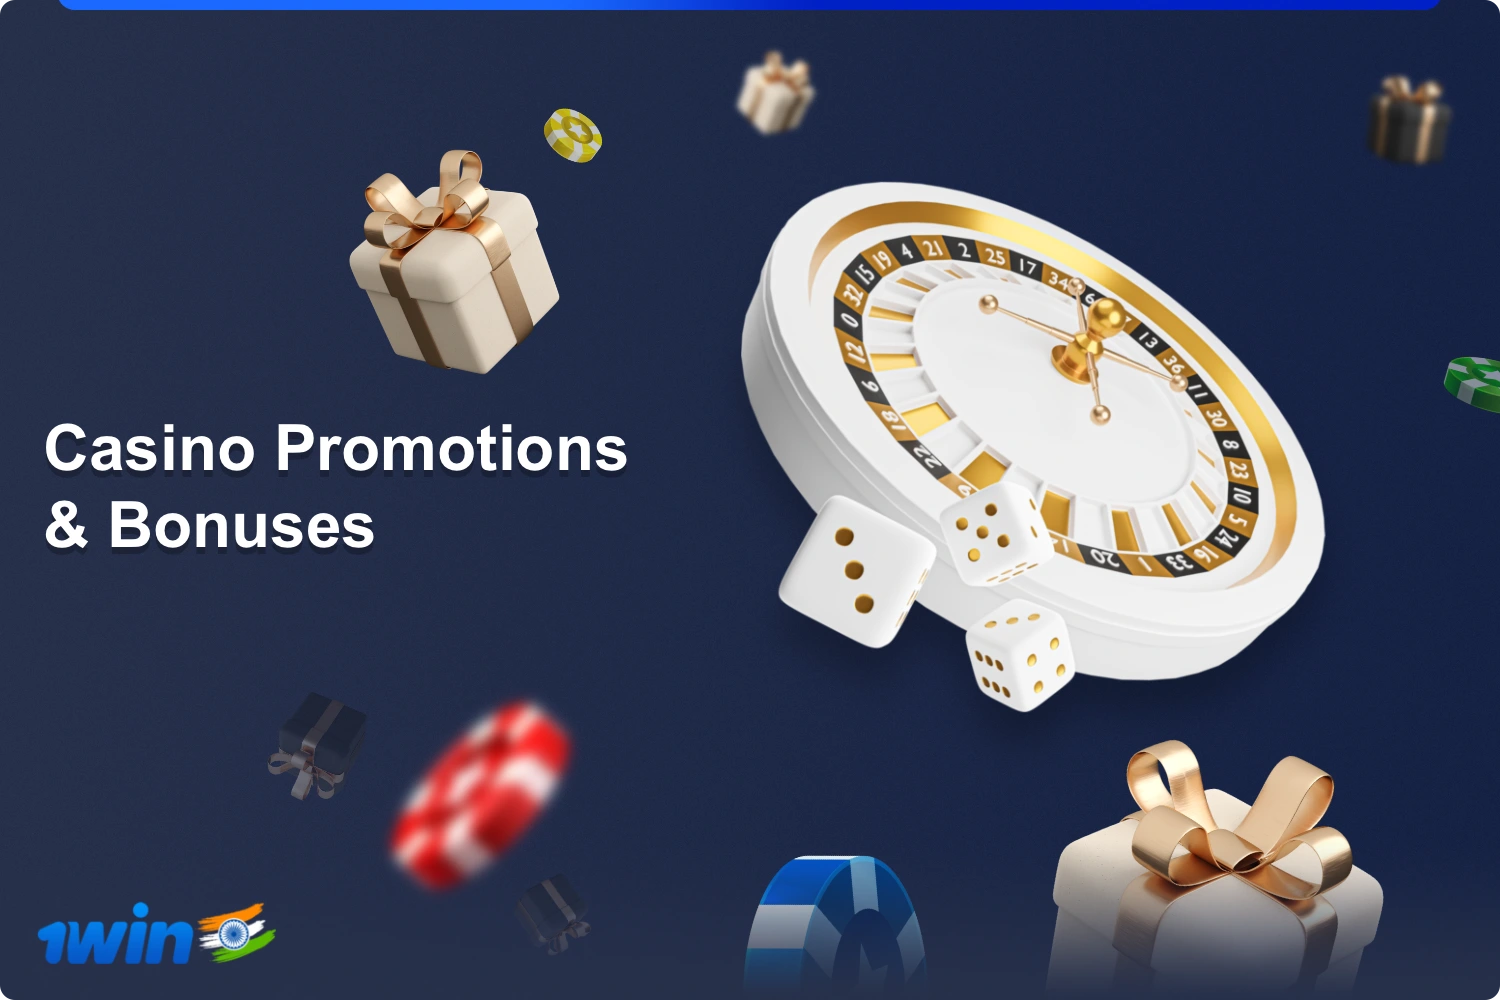 Various bonuses and special offers are available to 1win casino users from India